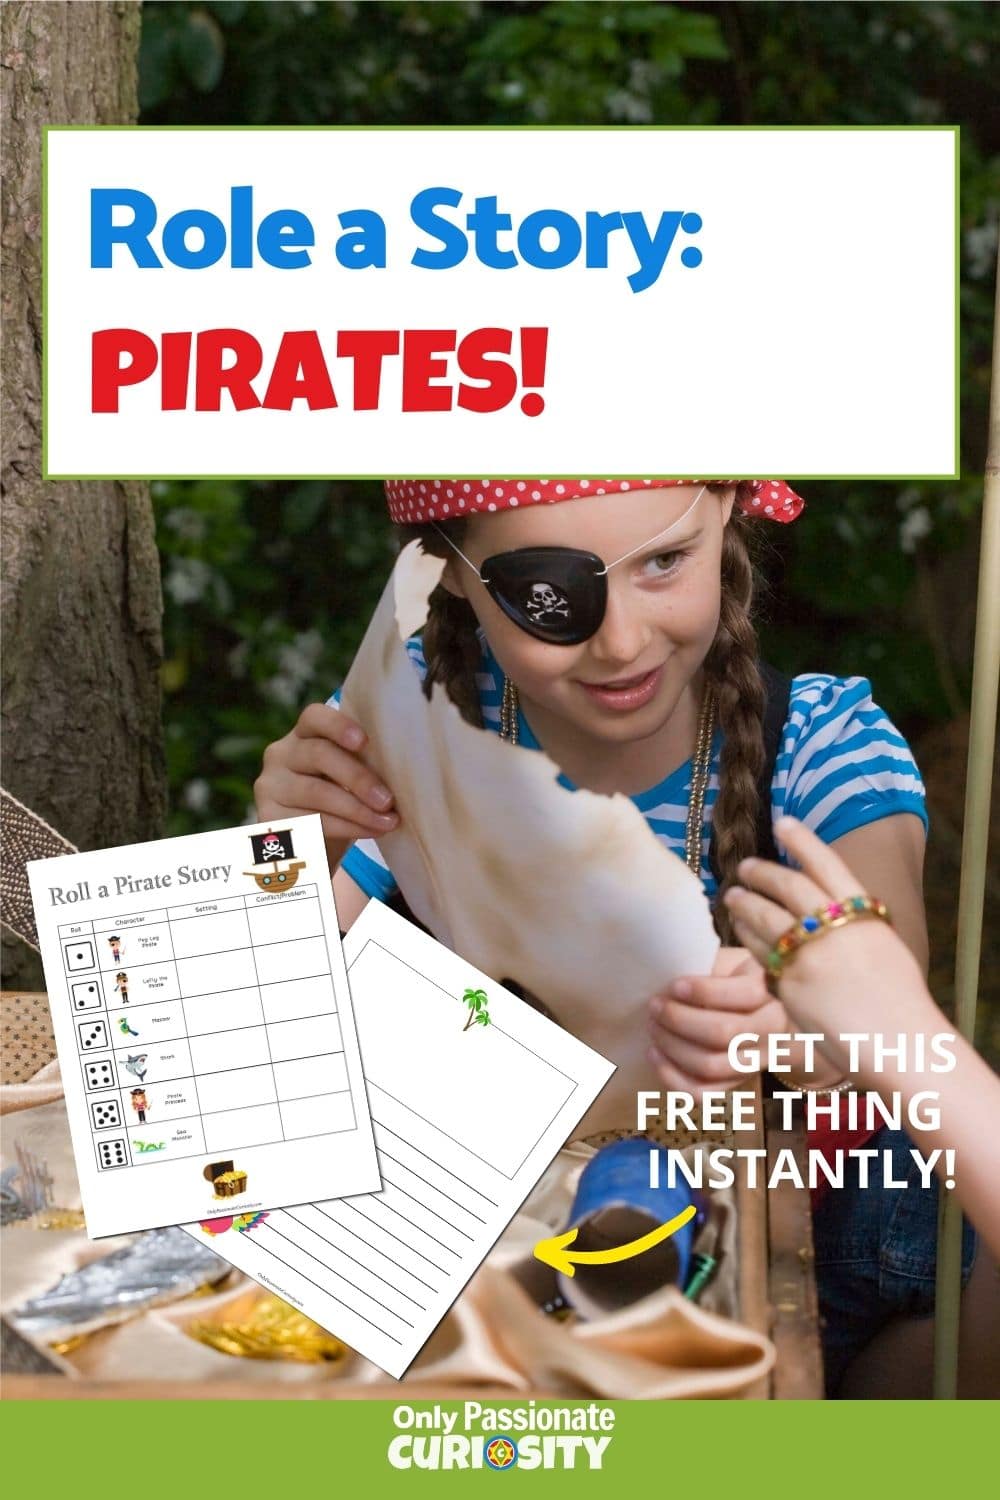 Celebrate Talk Like a Pirate Day (or any day!) with this fun roll-a-story activity! It's a perfect way to sneak in some creative writing with your kids!